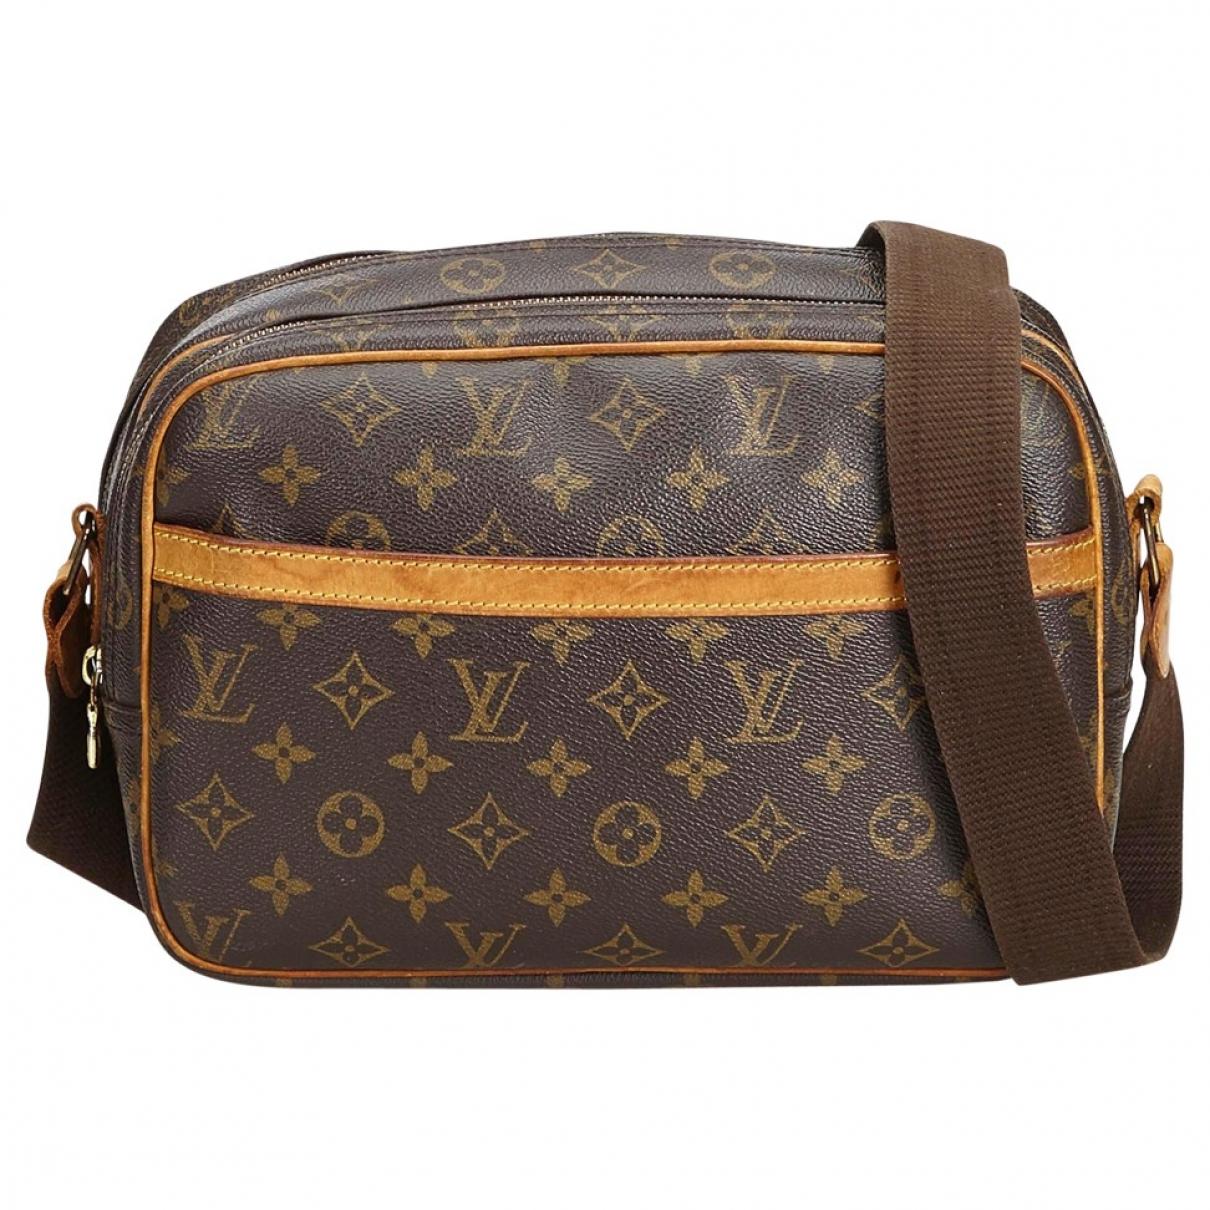 Louis Vuitton x Supreme Bag for women  Buy or Sell your LV Bags -  Vestiaire Collective